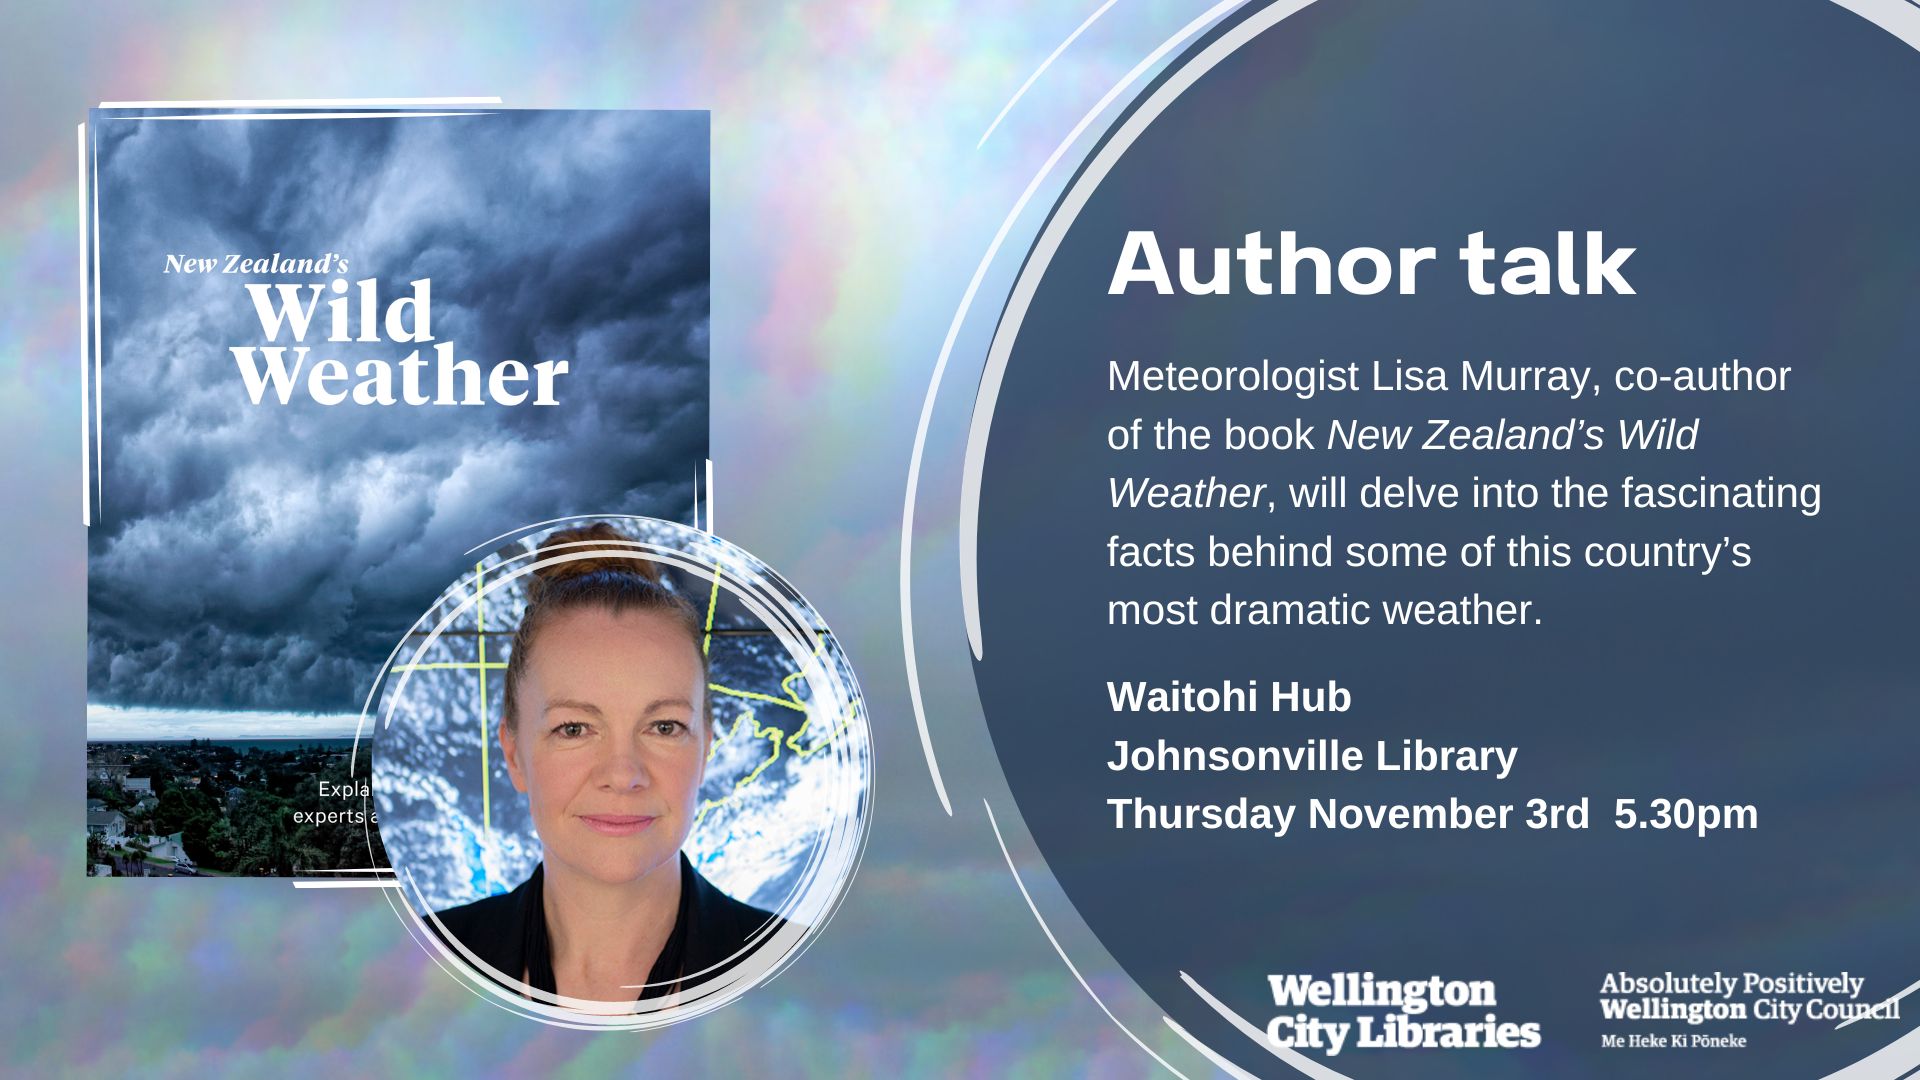 The headshot of the Wild Weather book - which shows a stormy sky with the author headshot.